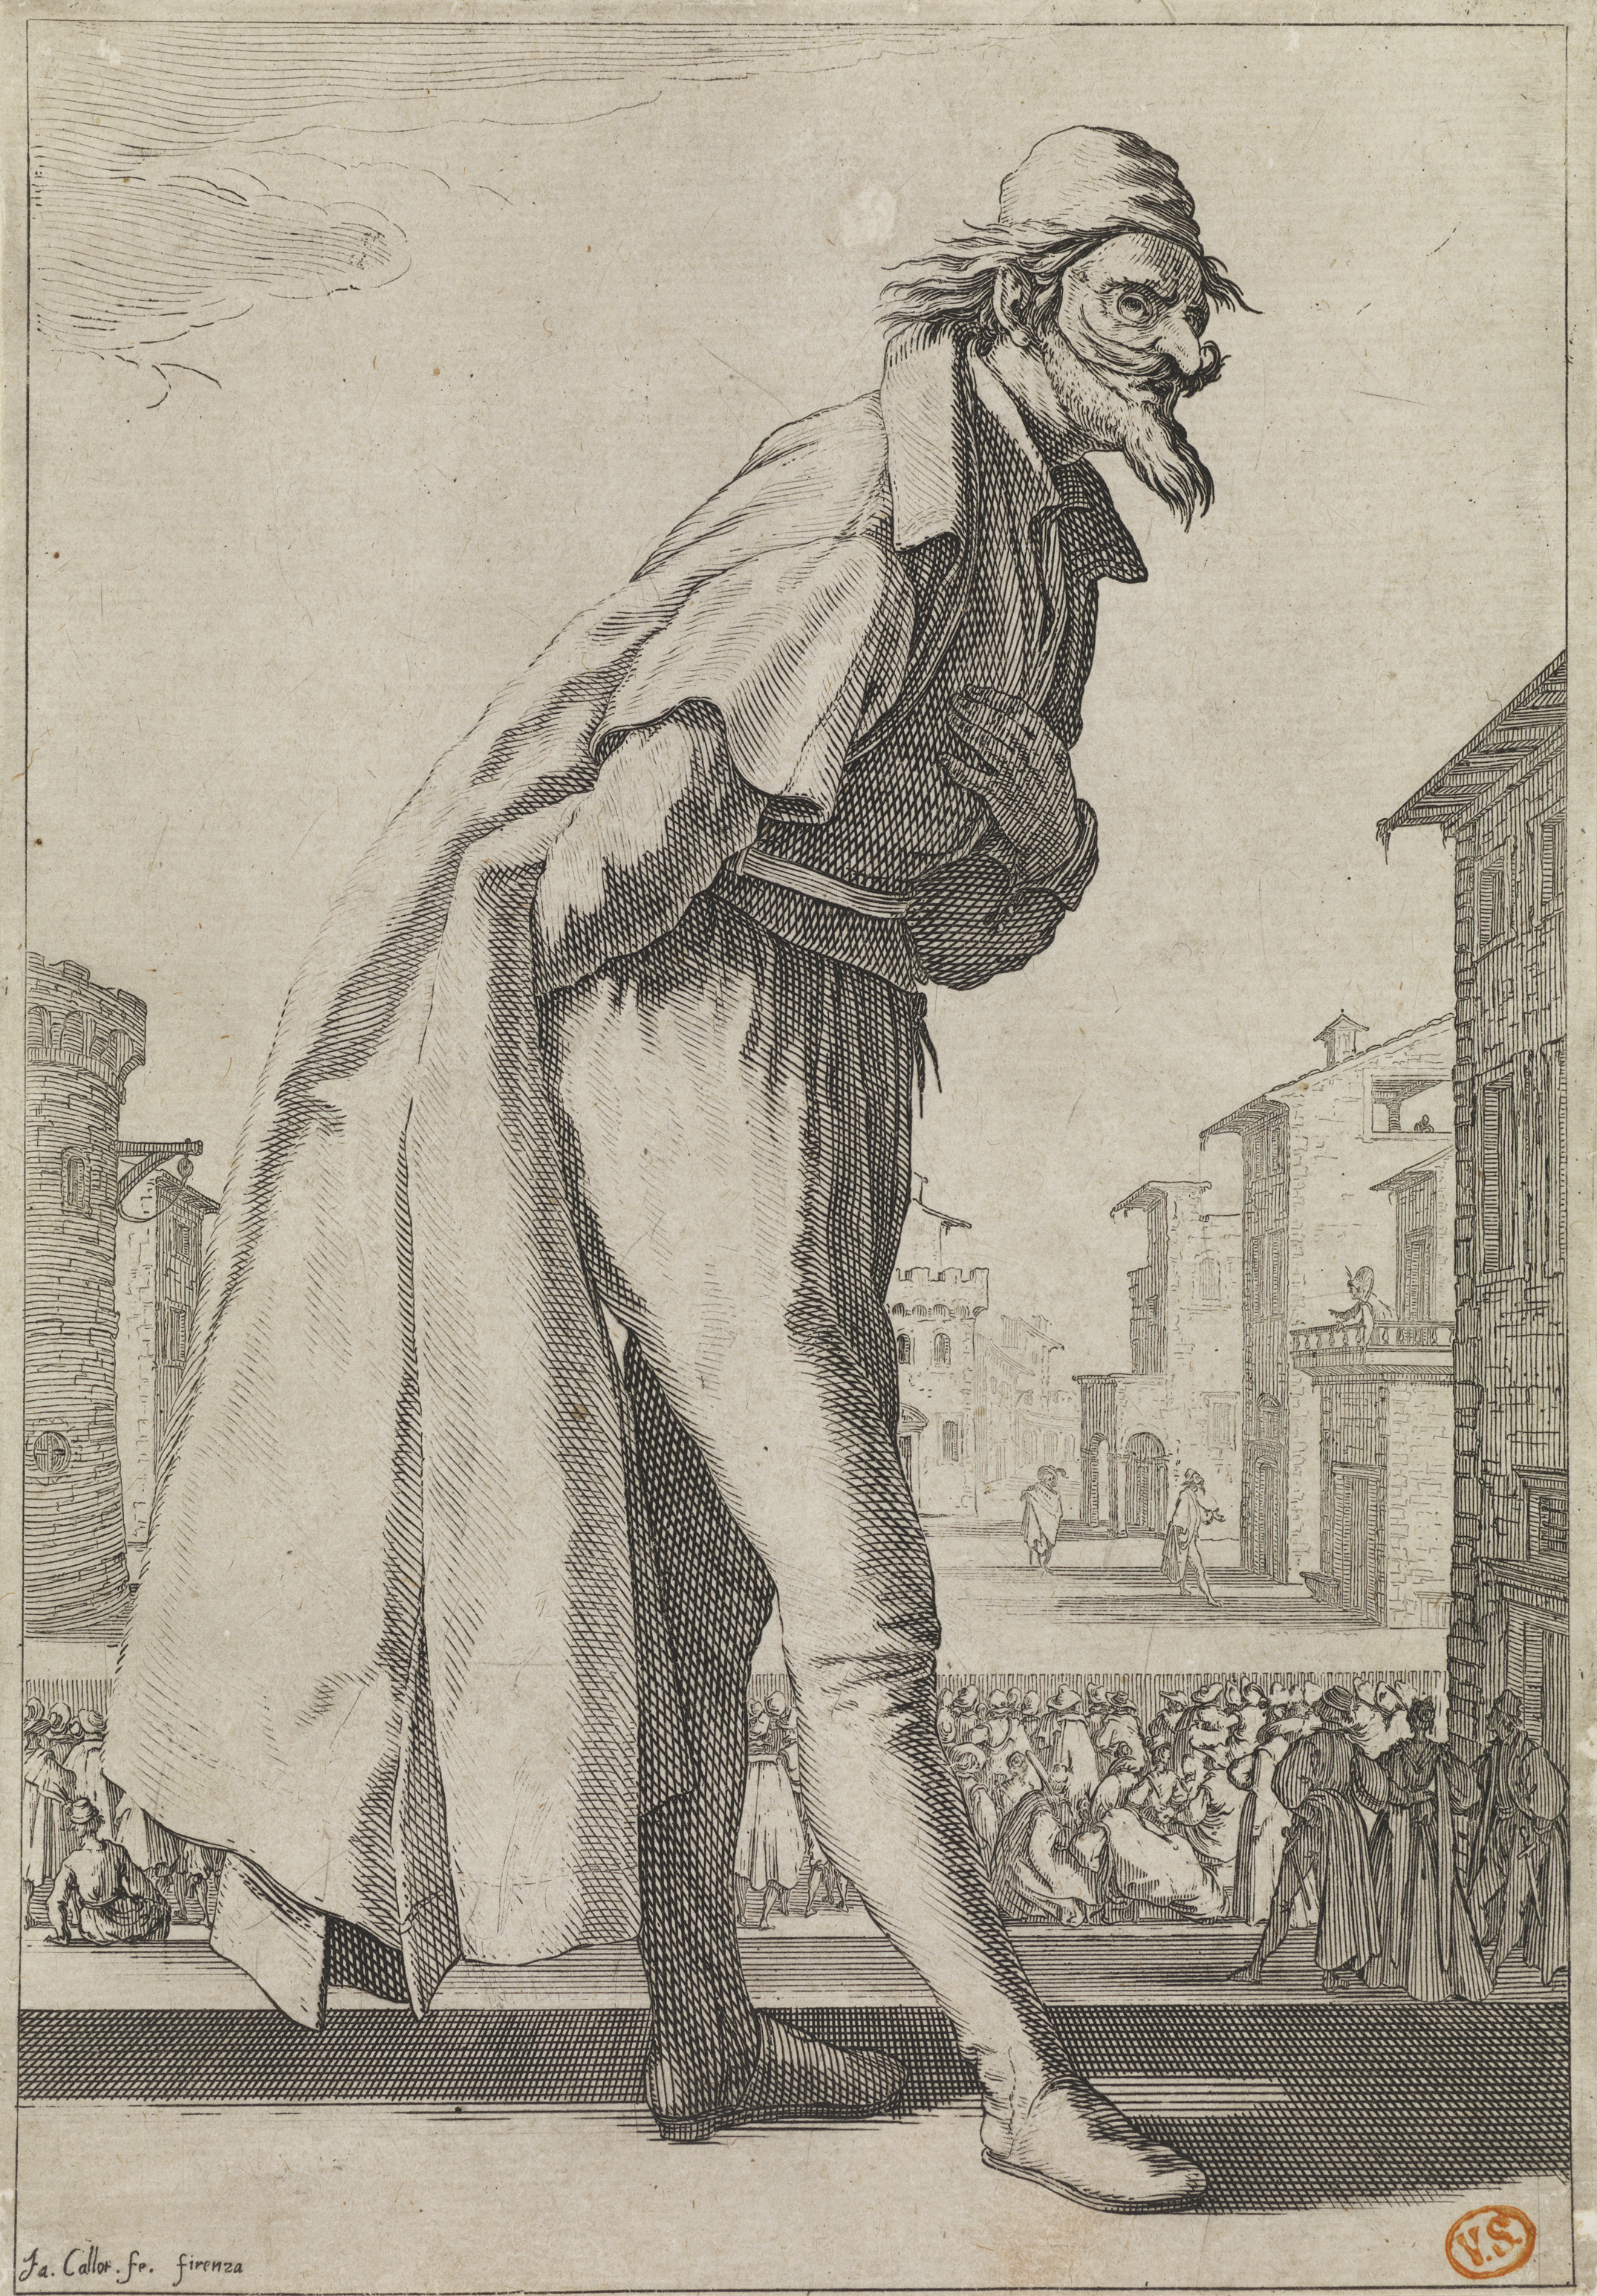 Jacques Callot, Pantalone, Musea Brugge, inv. 0000.GRO6209.III, CC0, image artinflanders.be, photo Dominique Provost